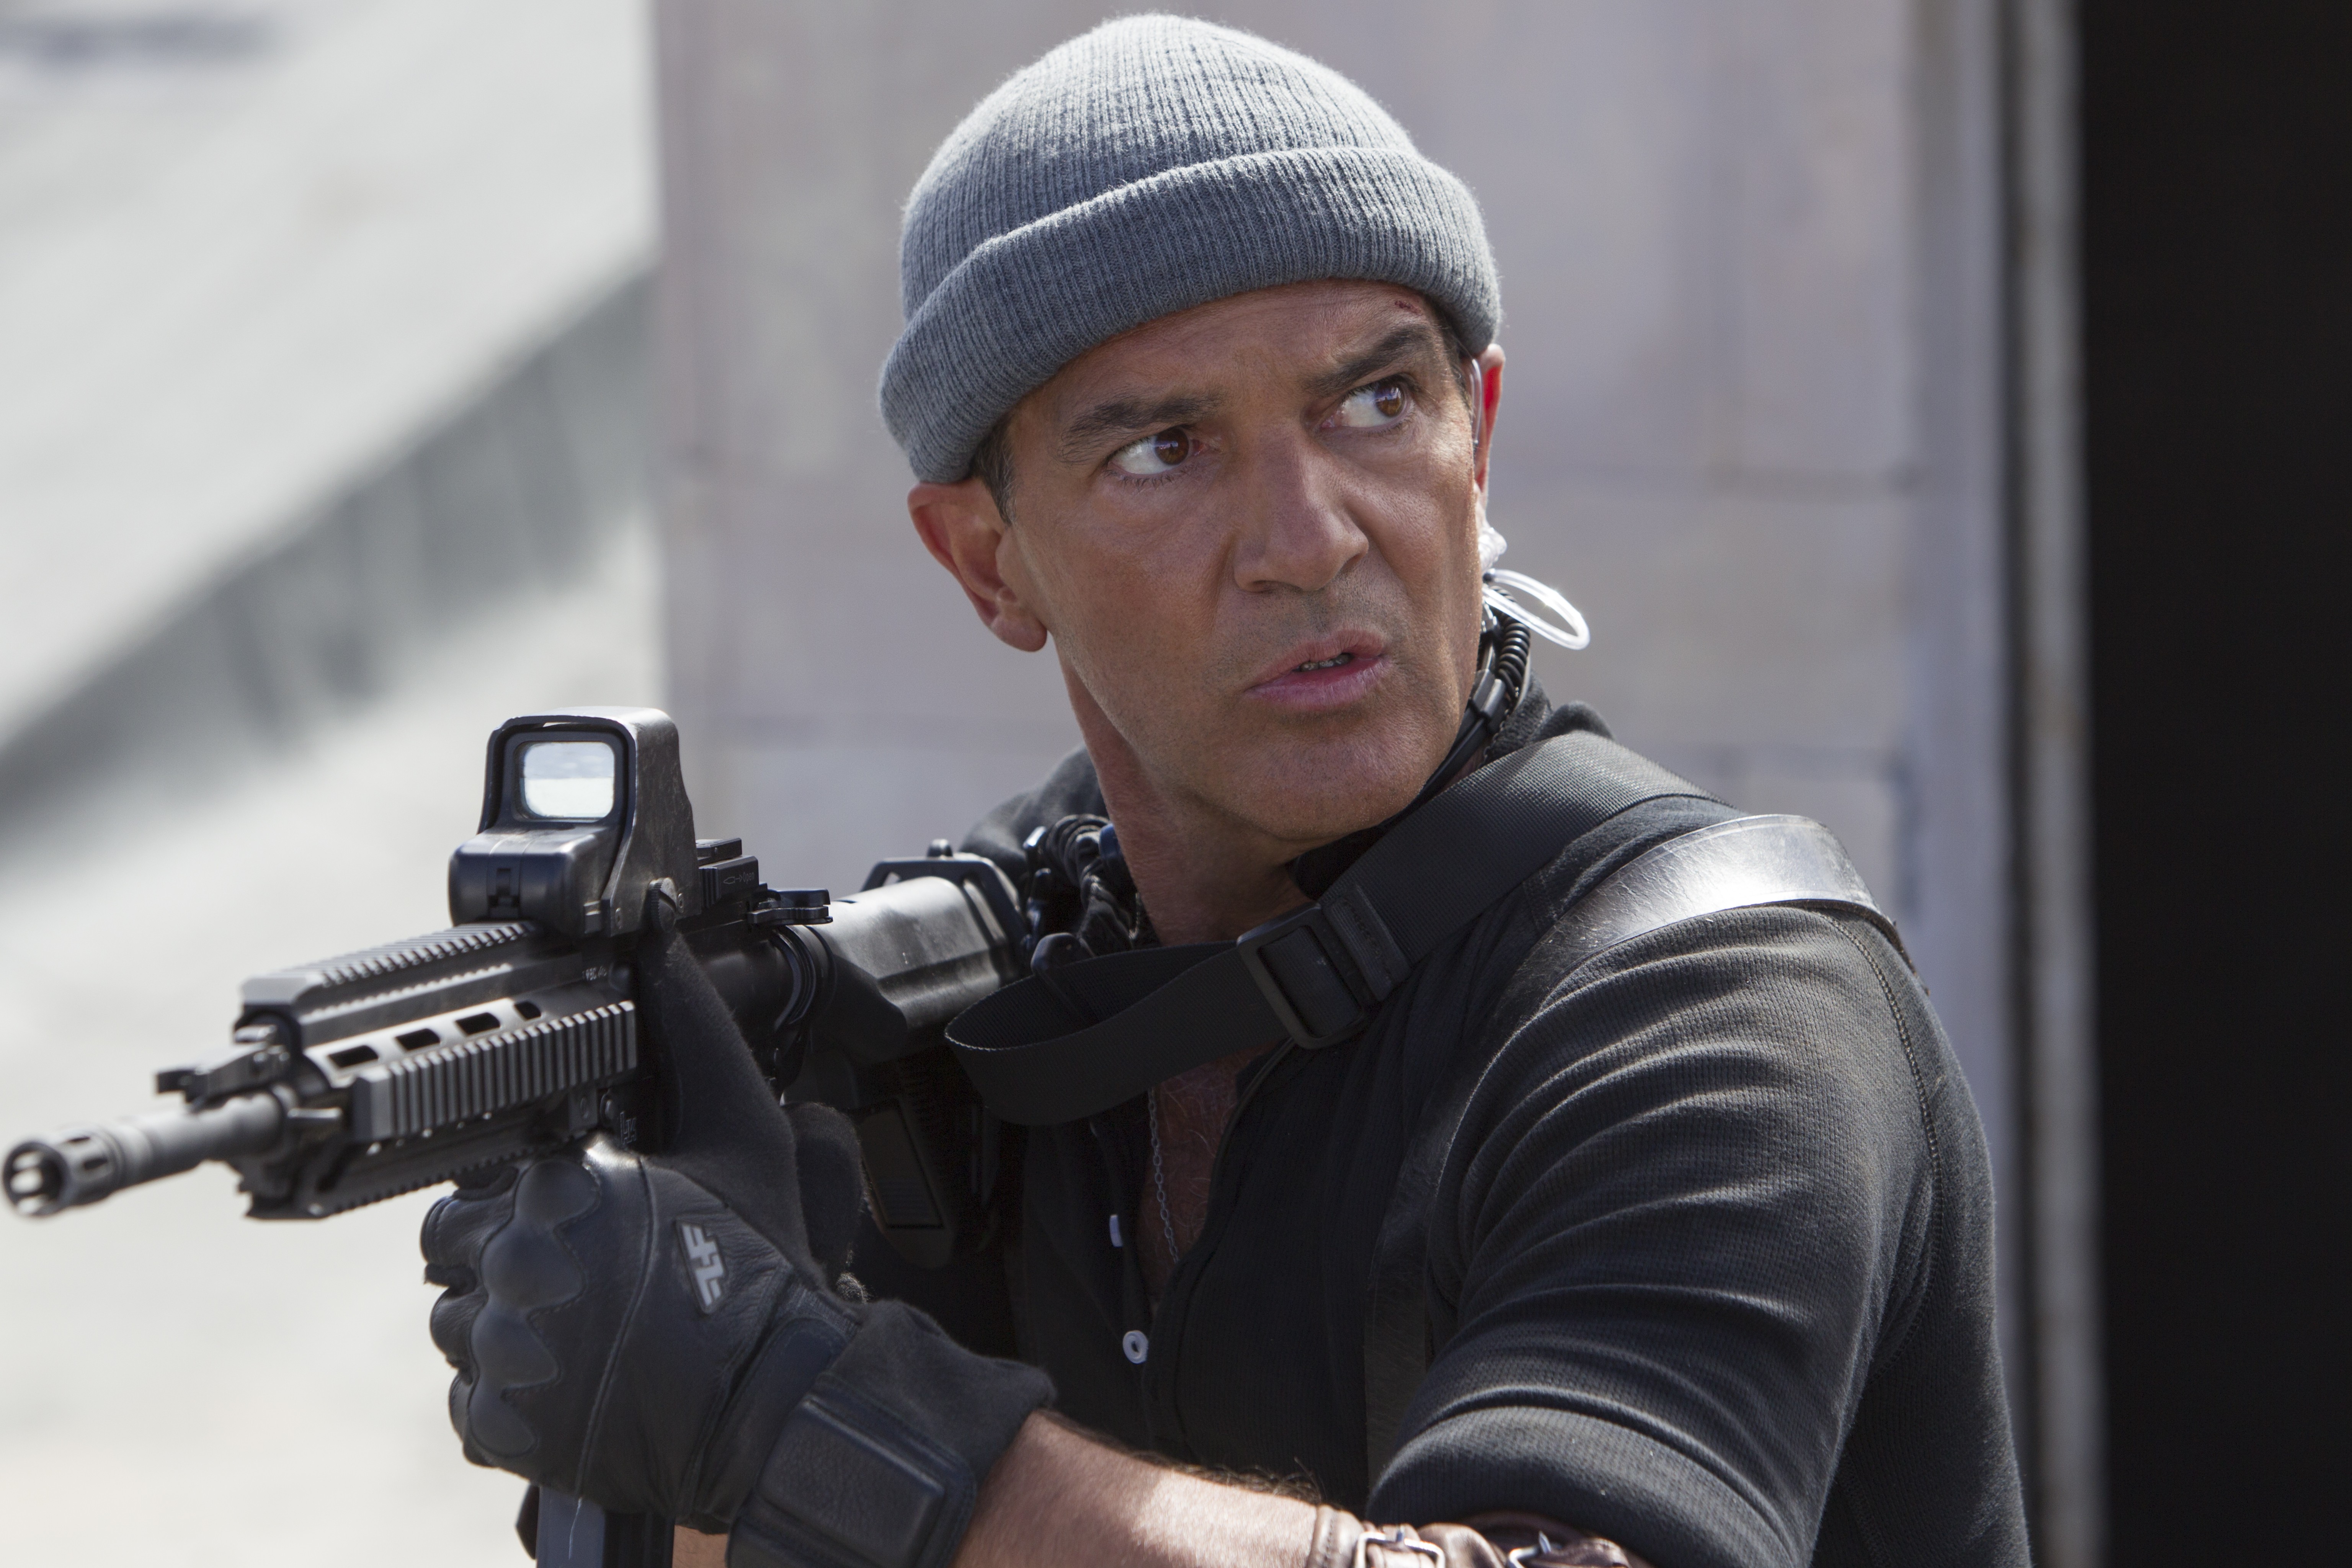 The Expendables 3 Galgo The Expendables Antonio Banderas 6144x4096